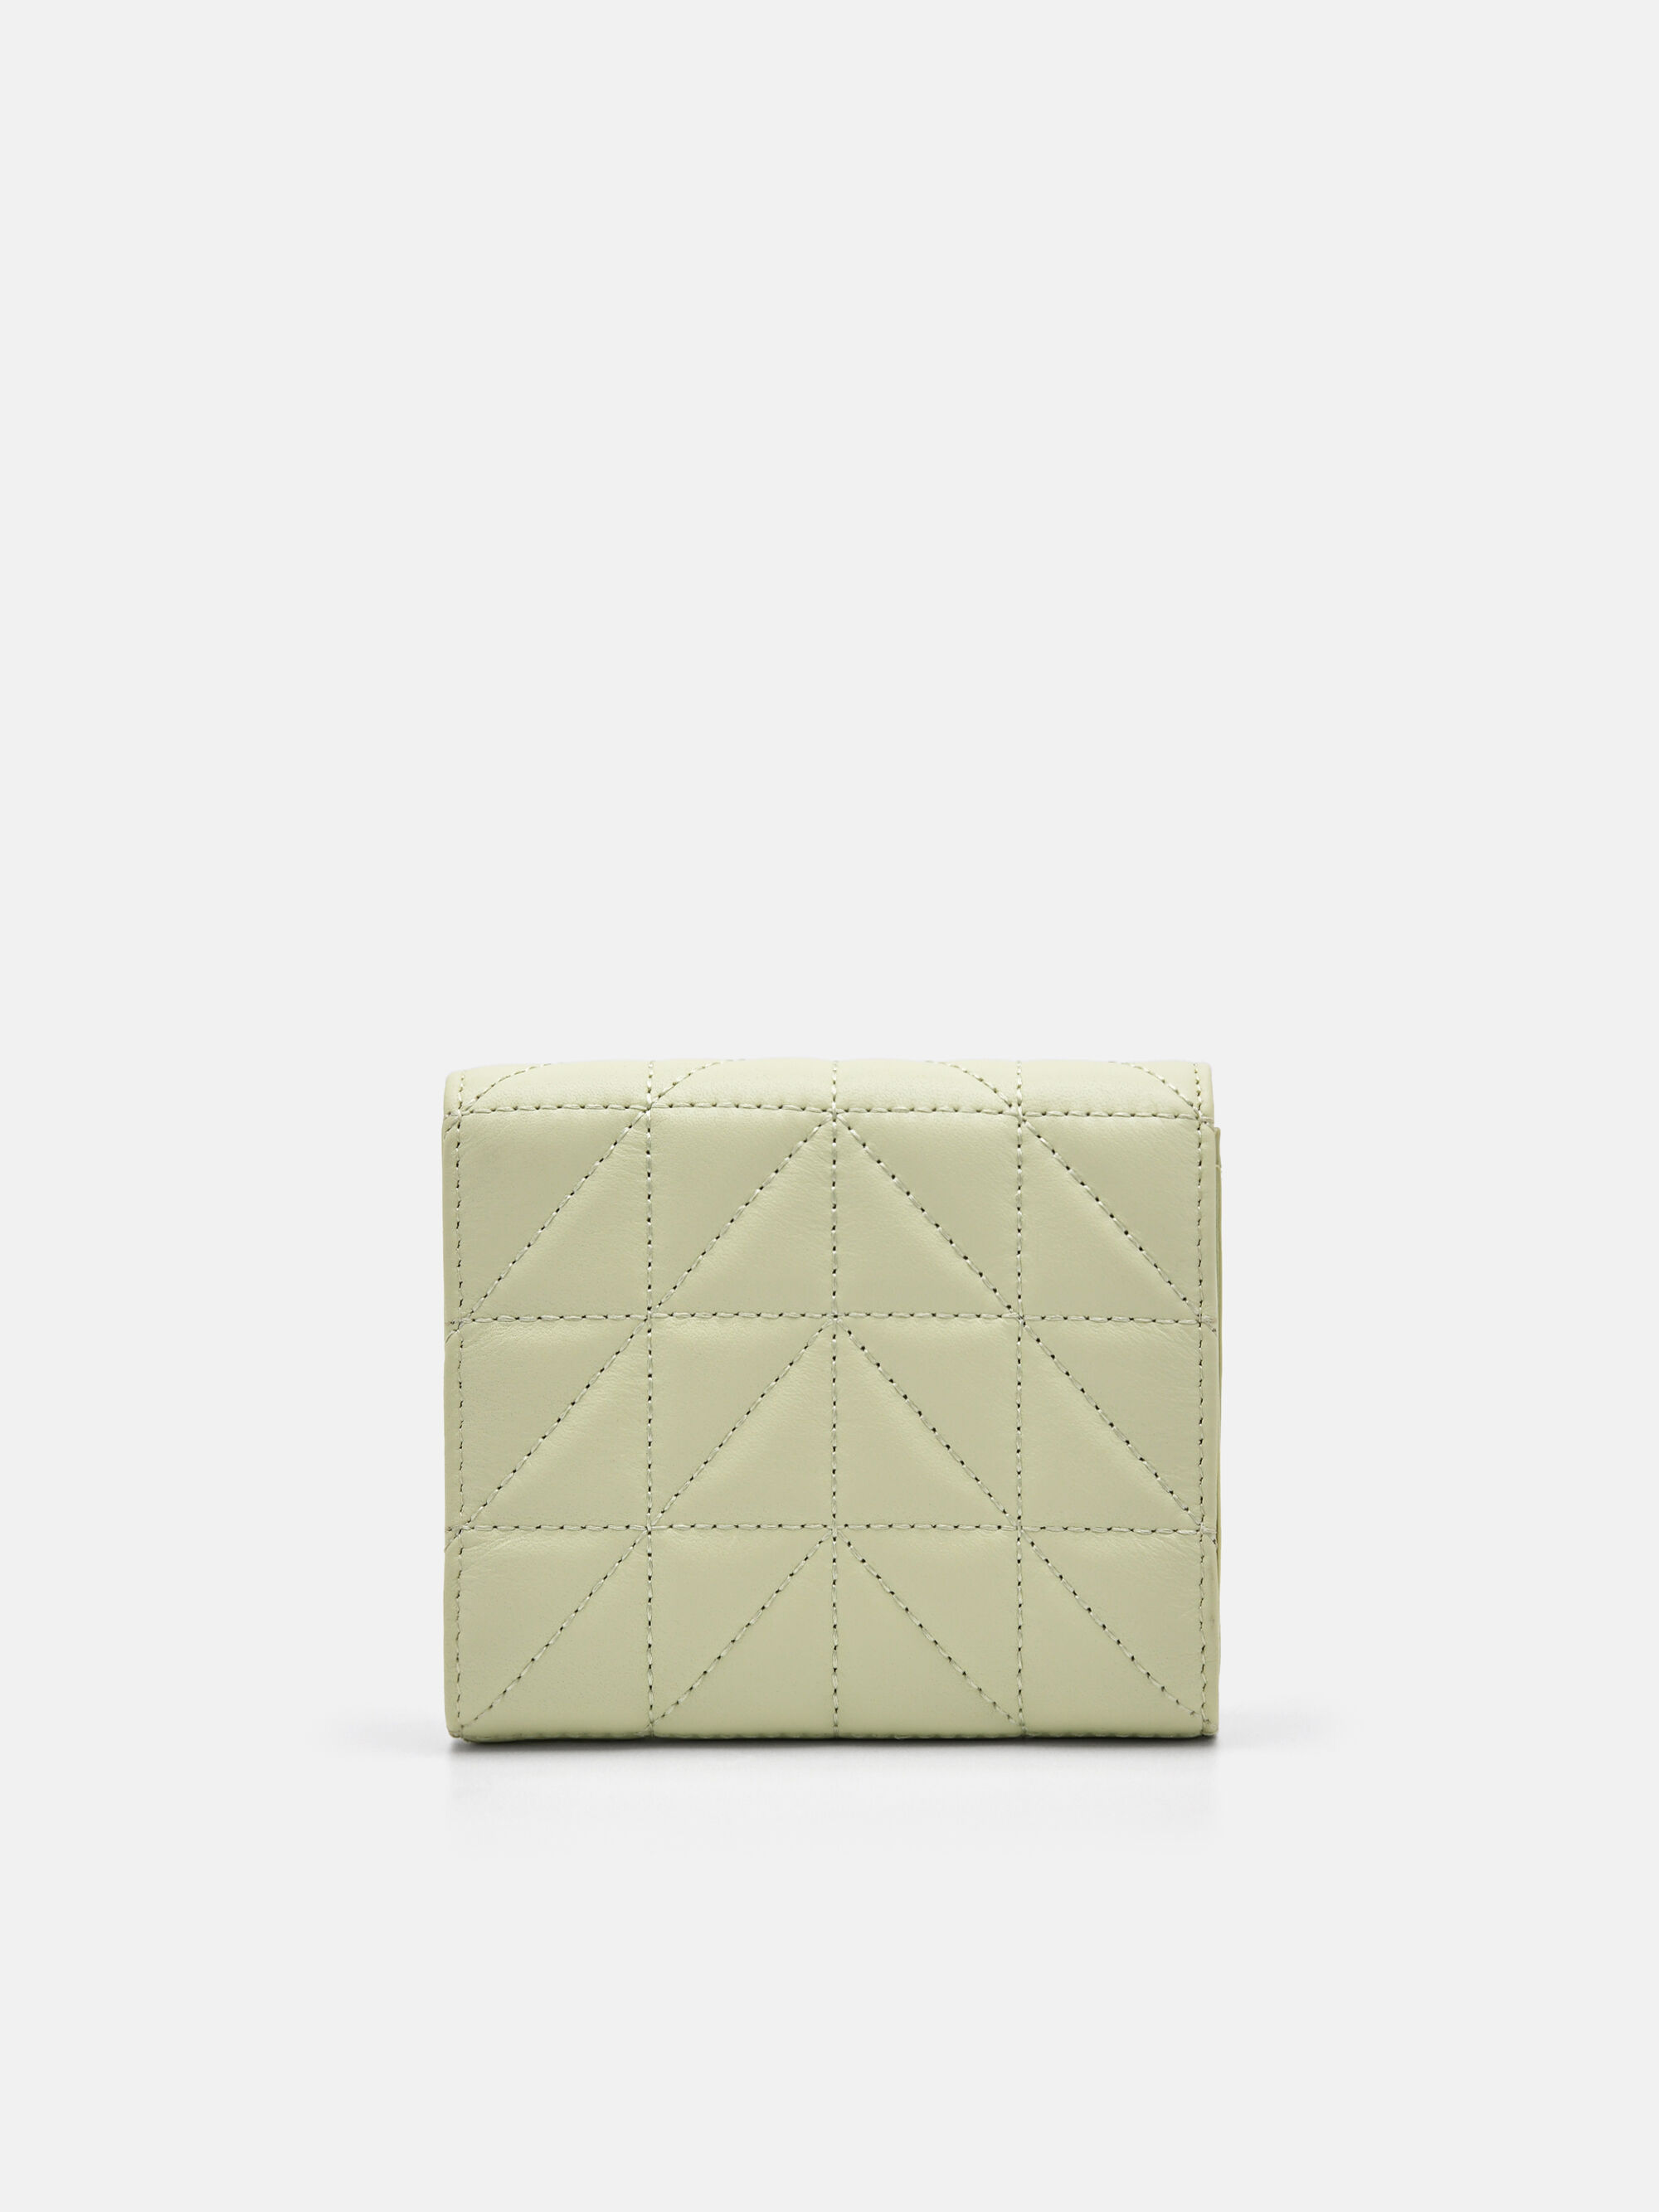 PEDRO Icon Leather Tri-Fold Wallet in Pixel, Light Green